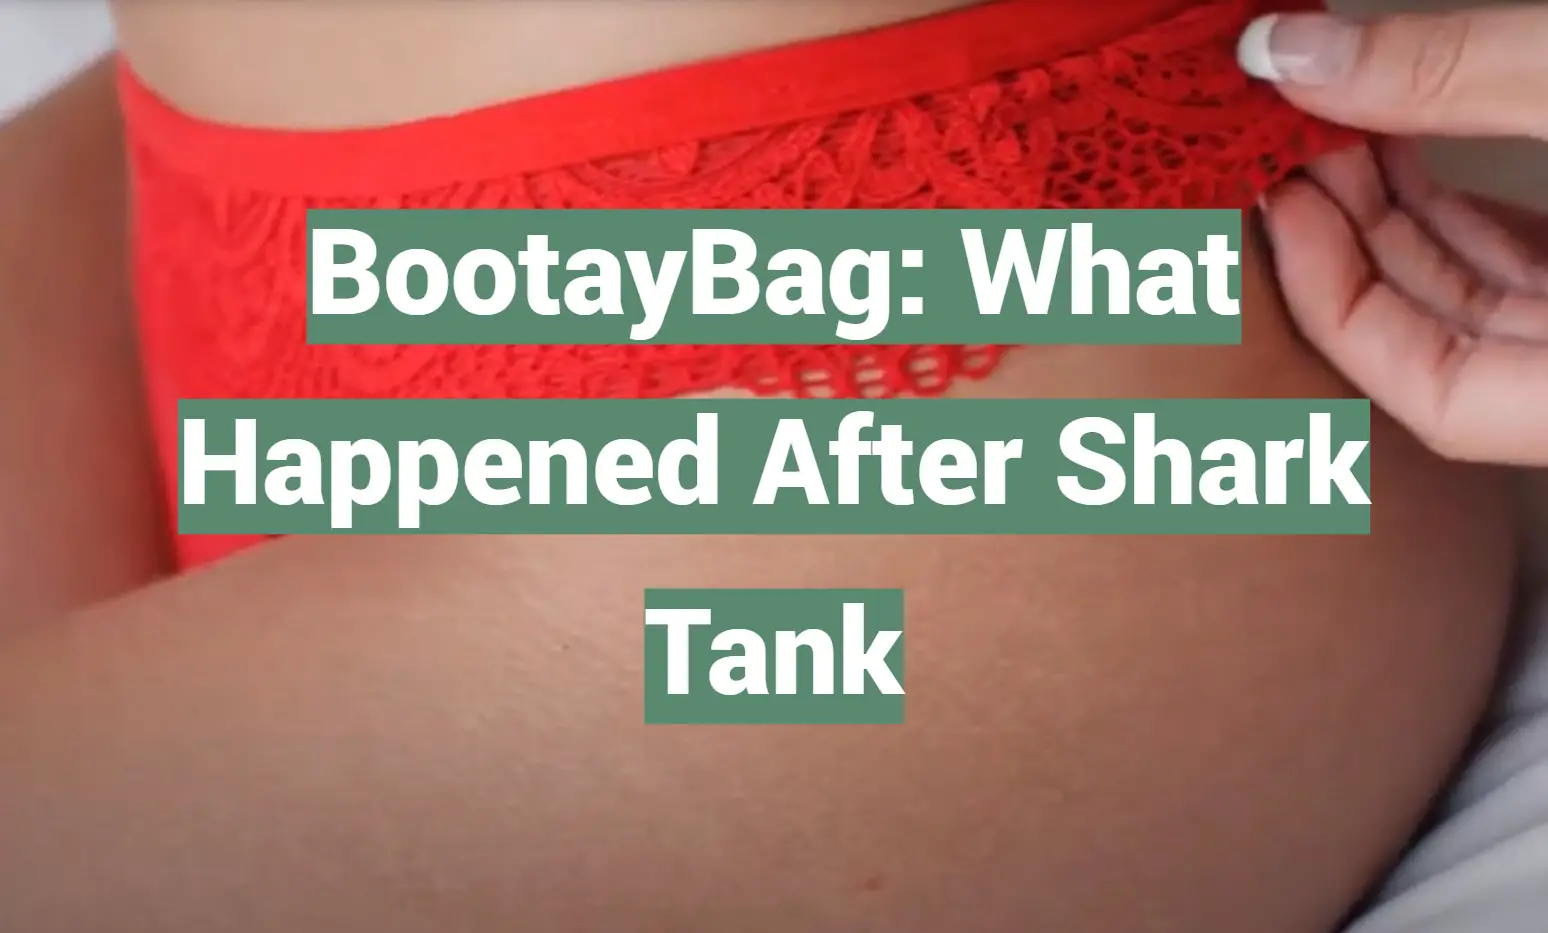 BootayBag: What Happened After Shark Tank